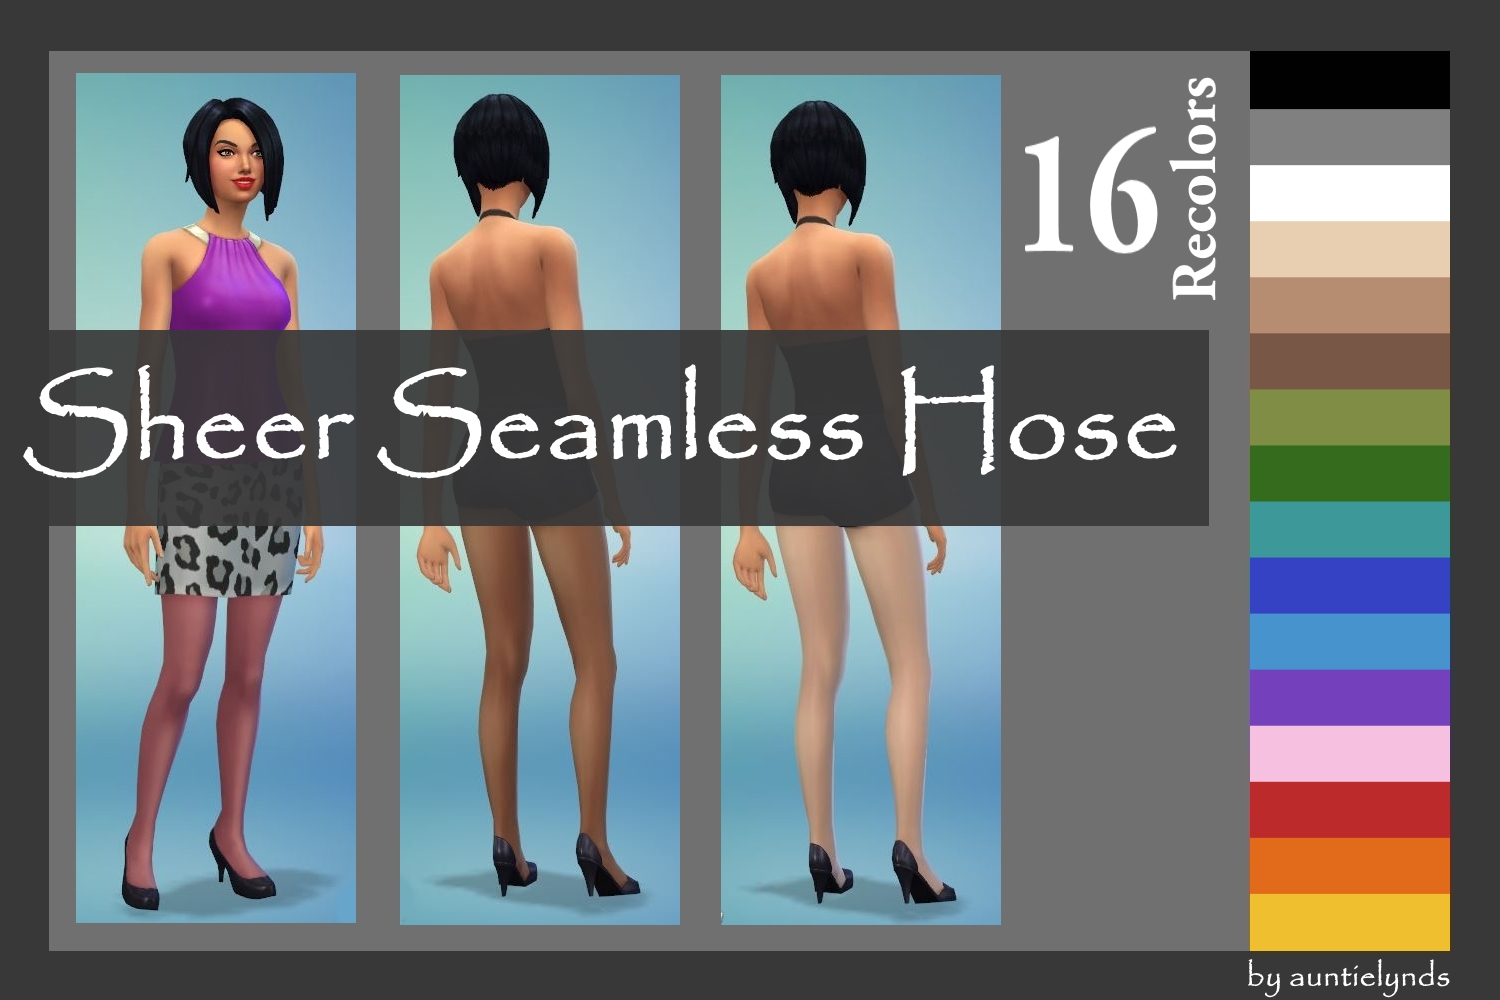 http://thumbs.modthesims2.com/img/3/4/1/4/1/8/7/MTS_auntielynds-1485098-Cover.jpg